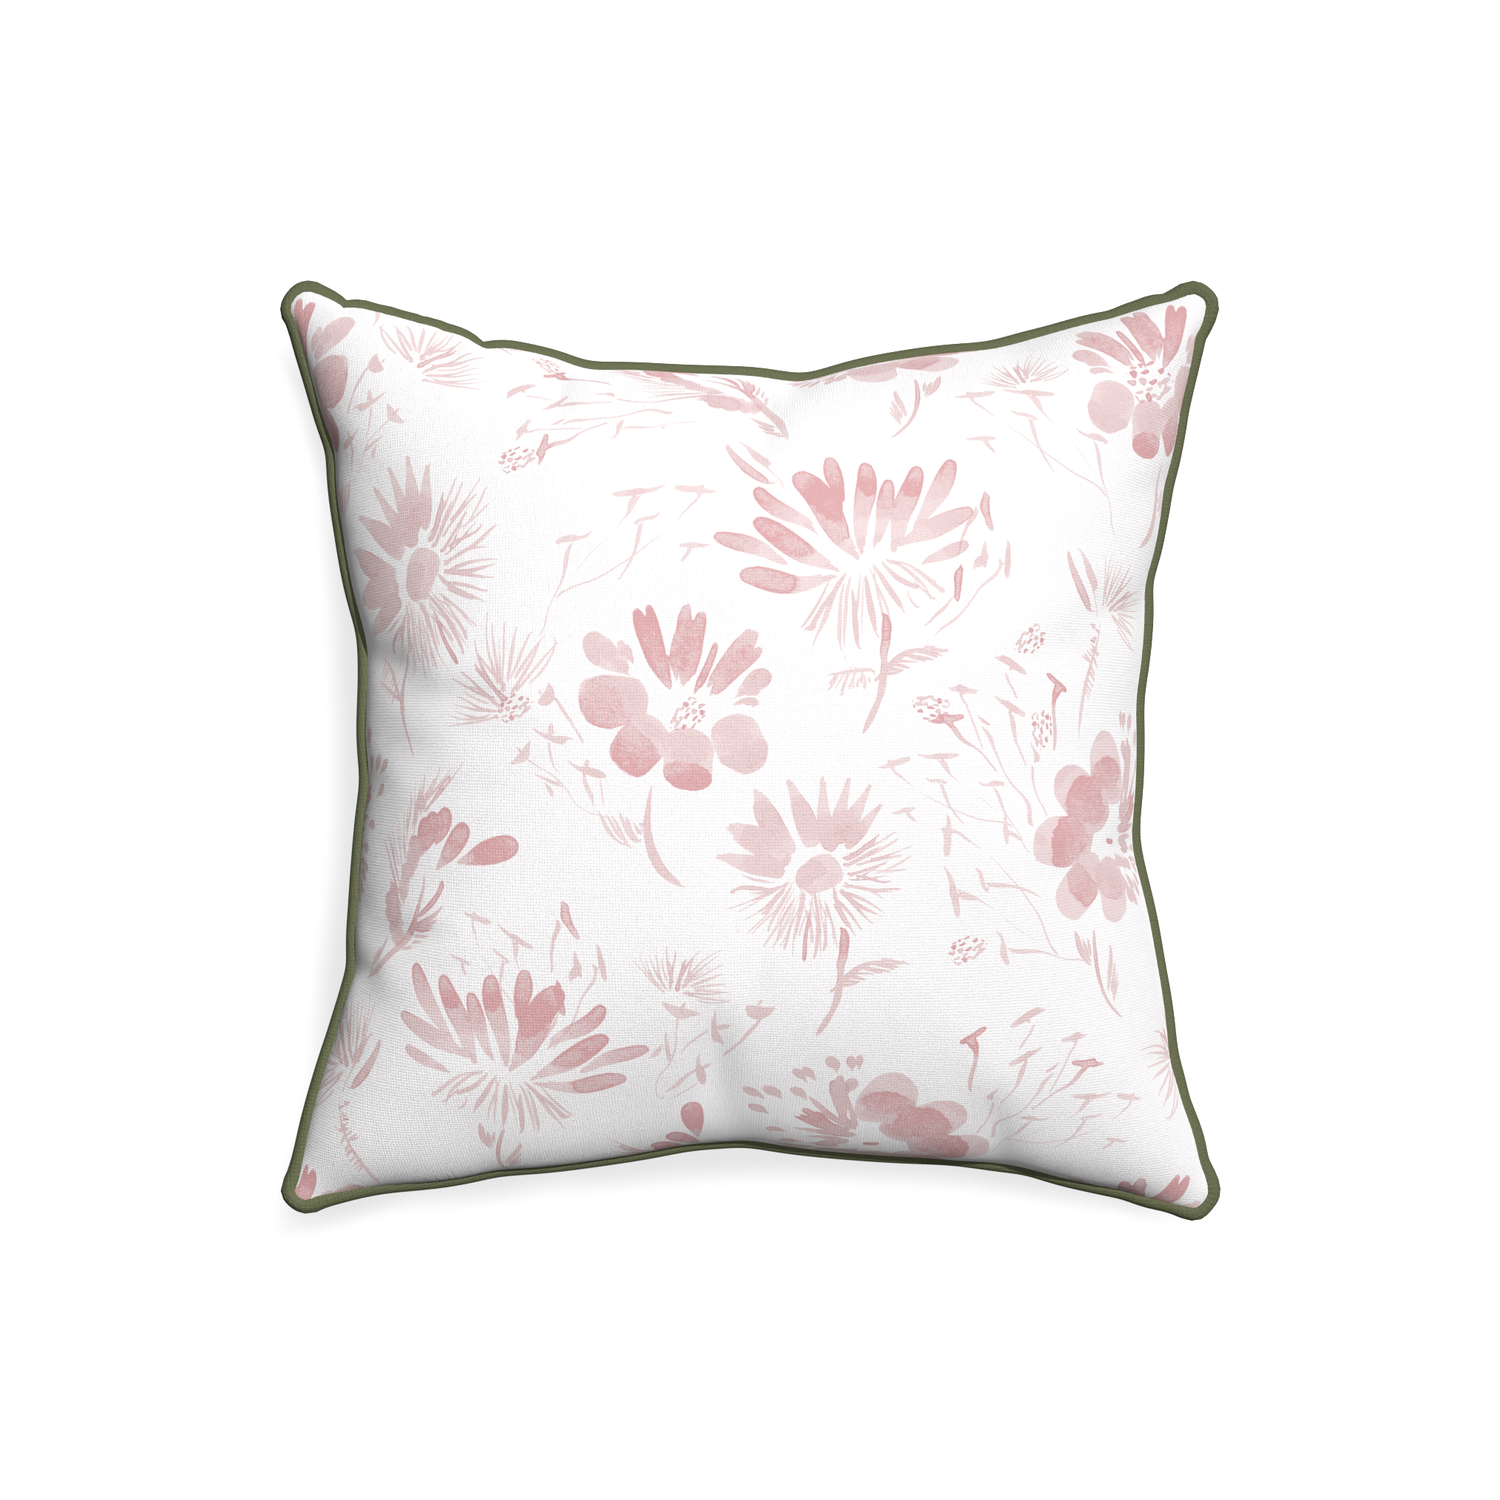 20-square blake custom pink floralpillow with f piping on white background